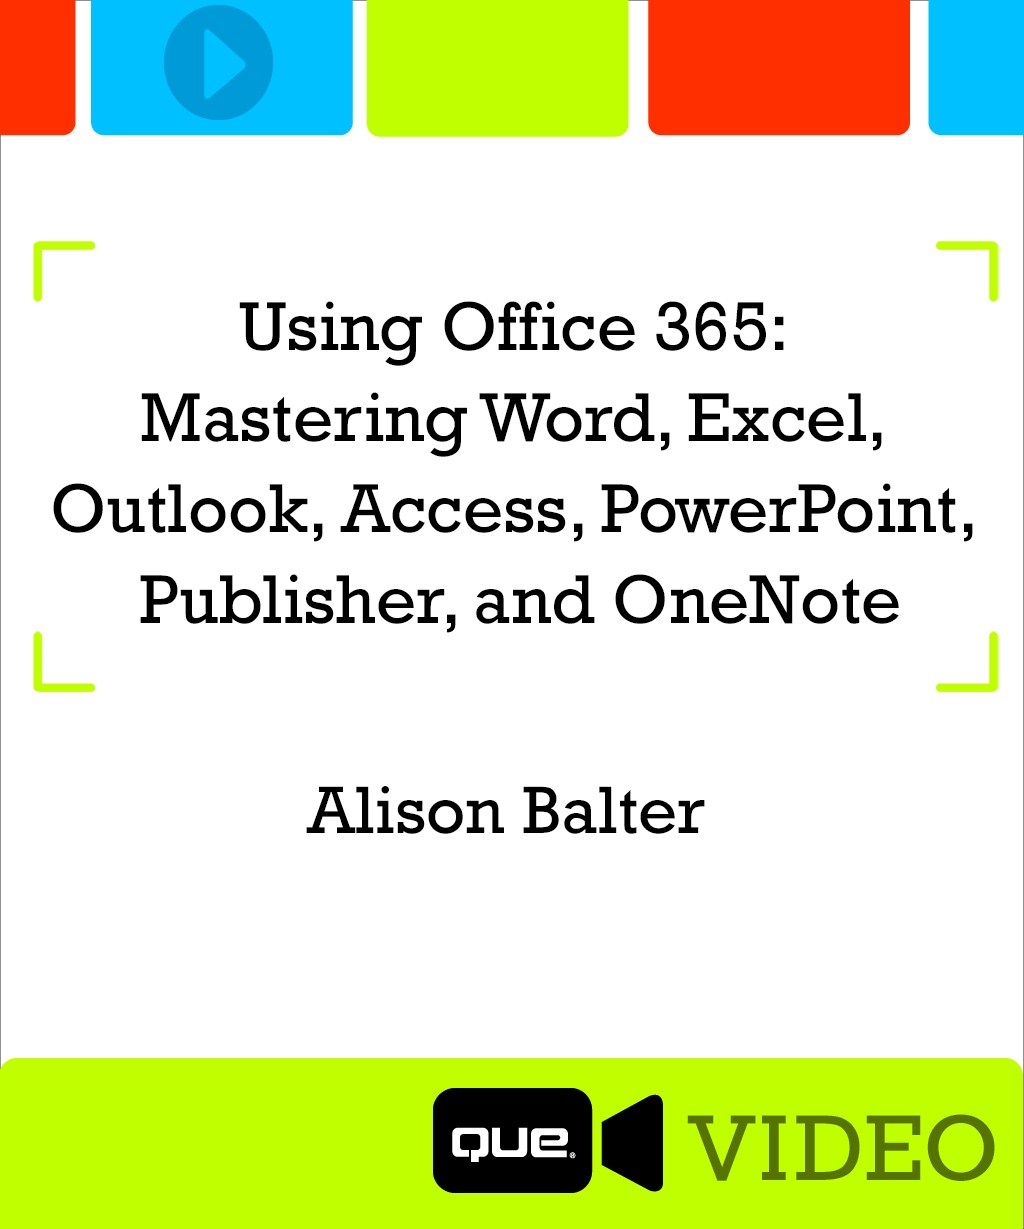 Using Office 365: Mastering Word, Excel, Outlook, Access, PowerPoint, Publisher and OneNote (Que Video)